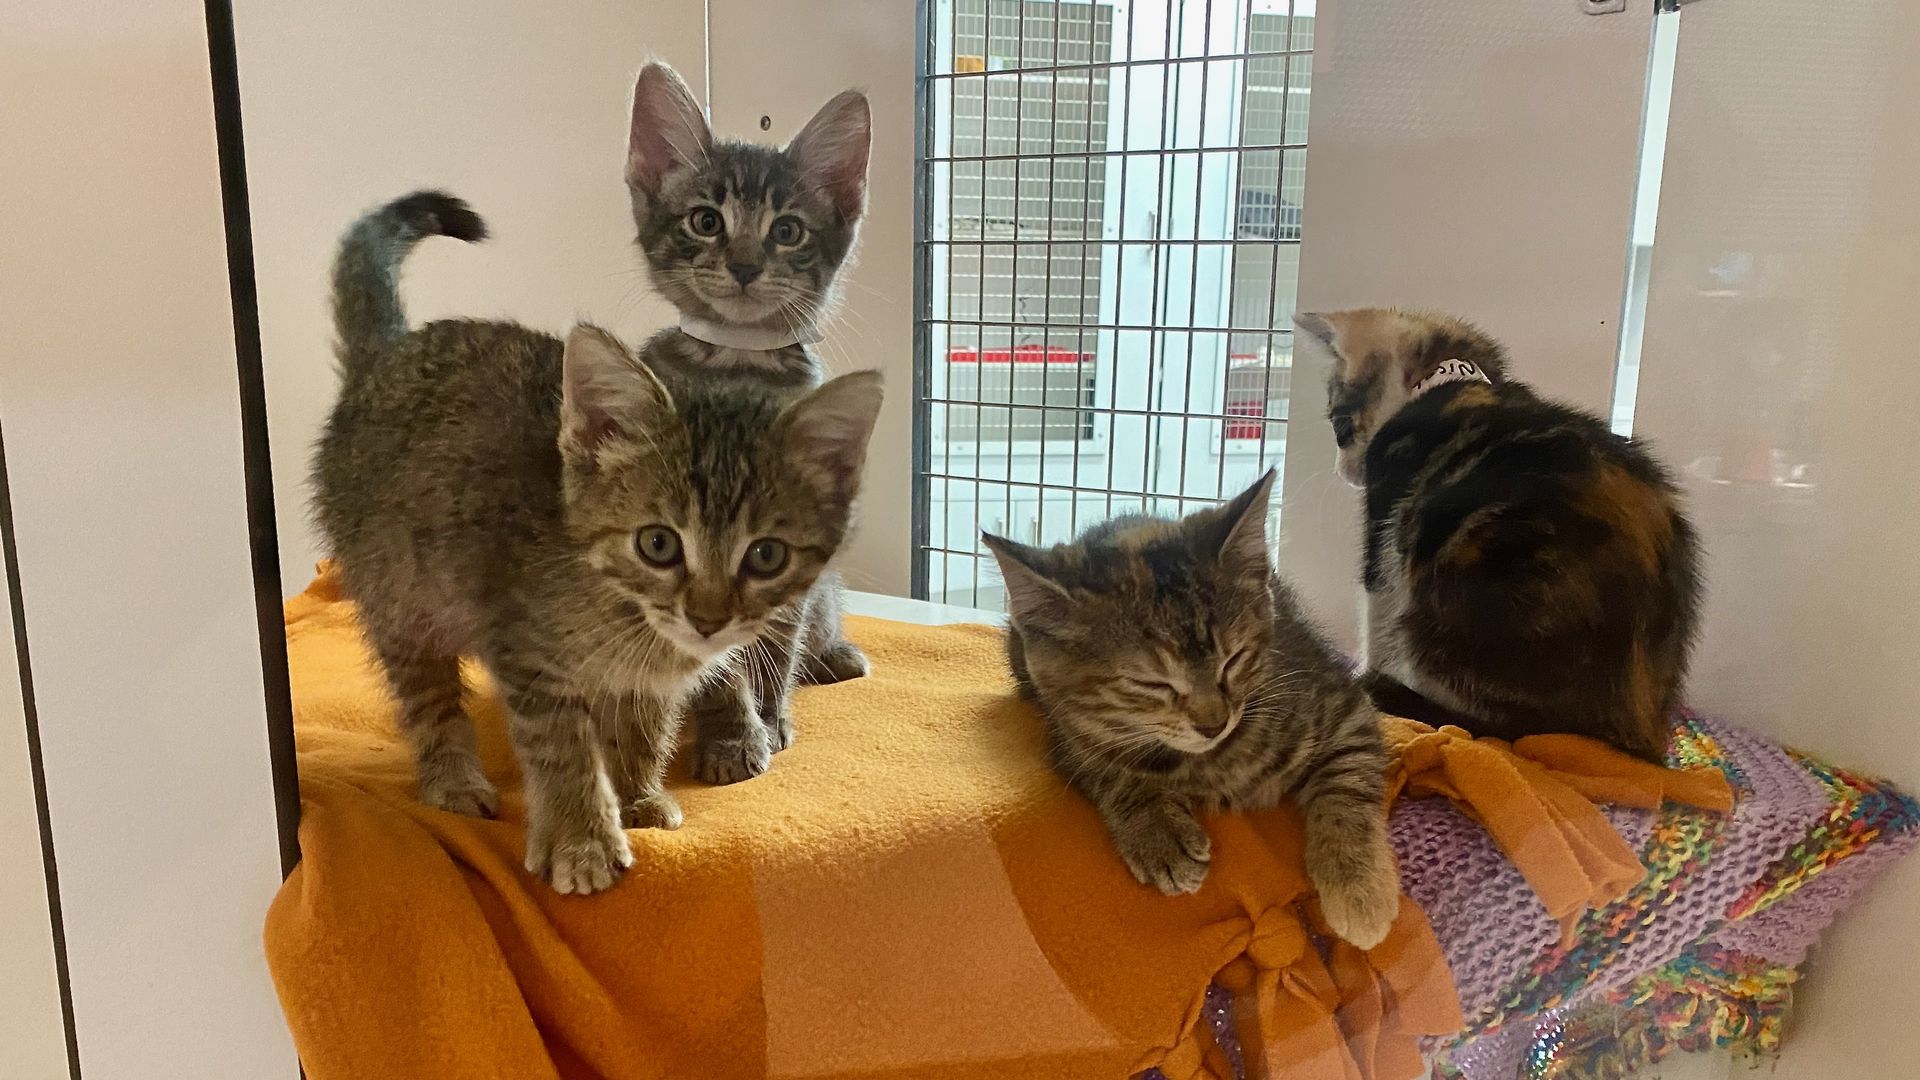 Four kittens standing on an orange blanket; two are alert, one is asleep and one has its back turned